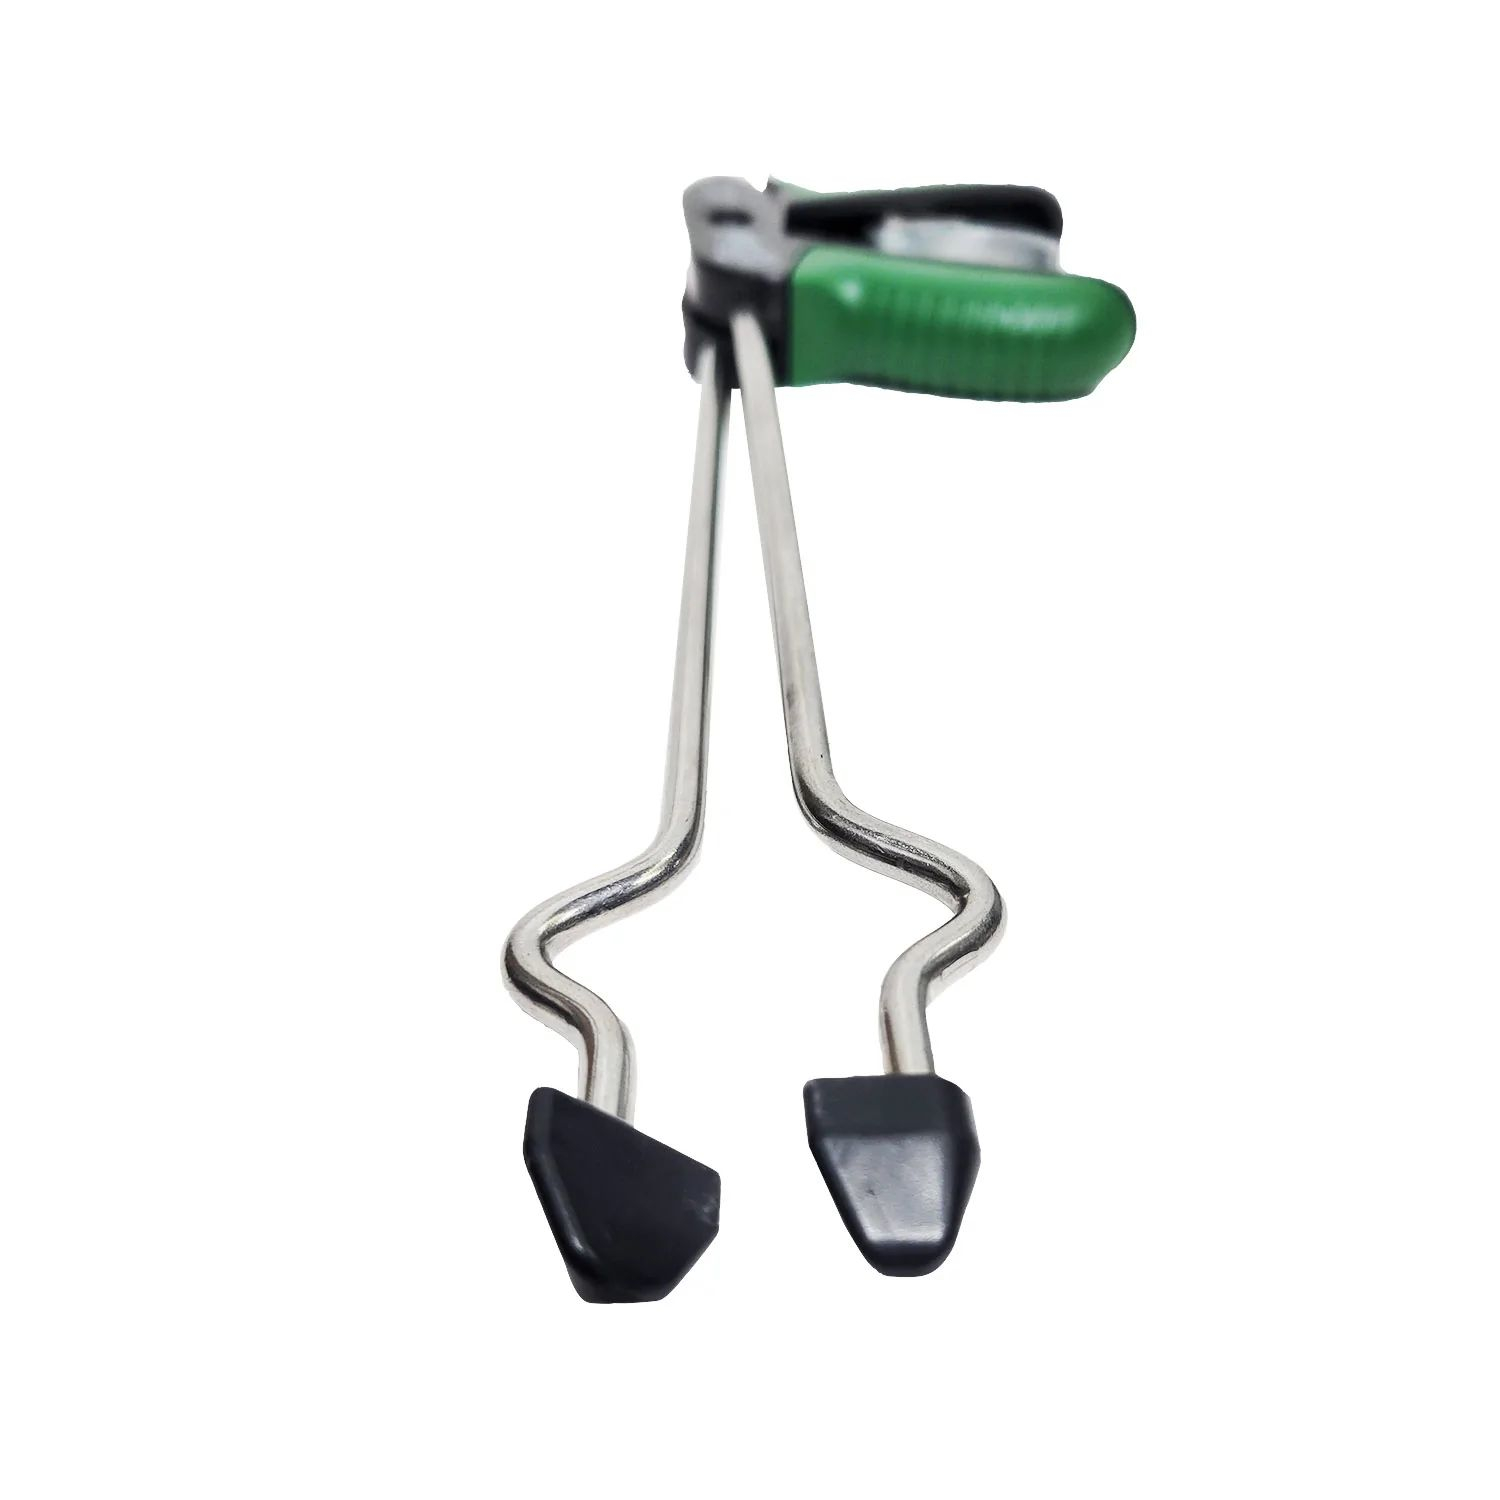 OUT TOOL Jaw Spreader